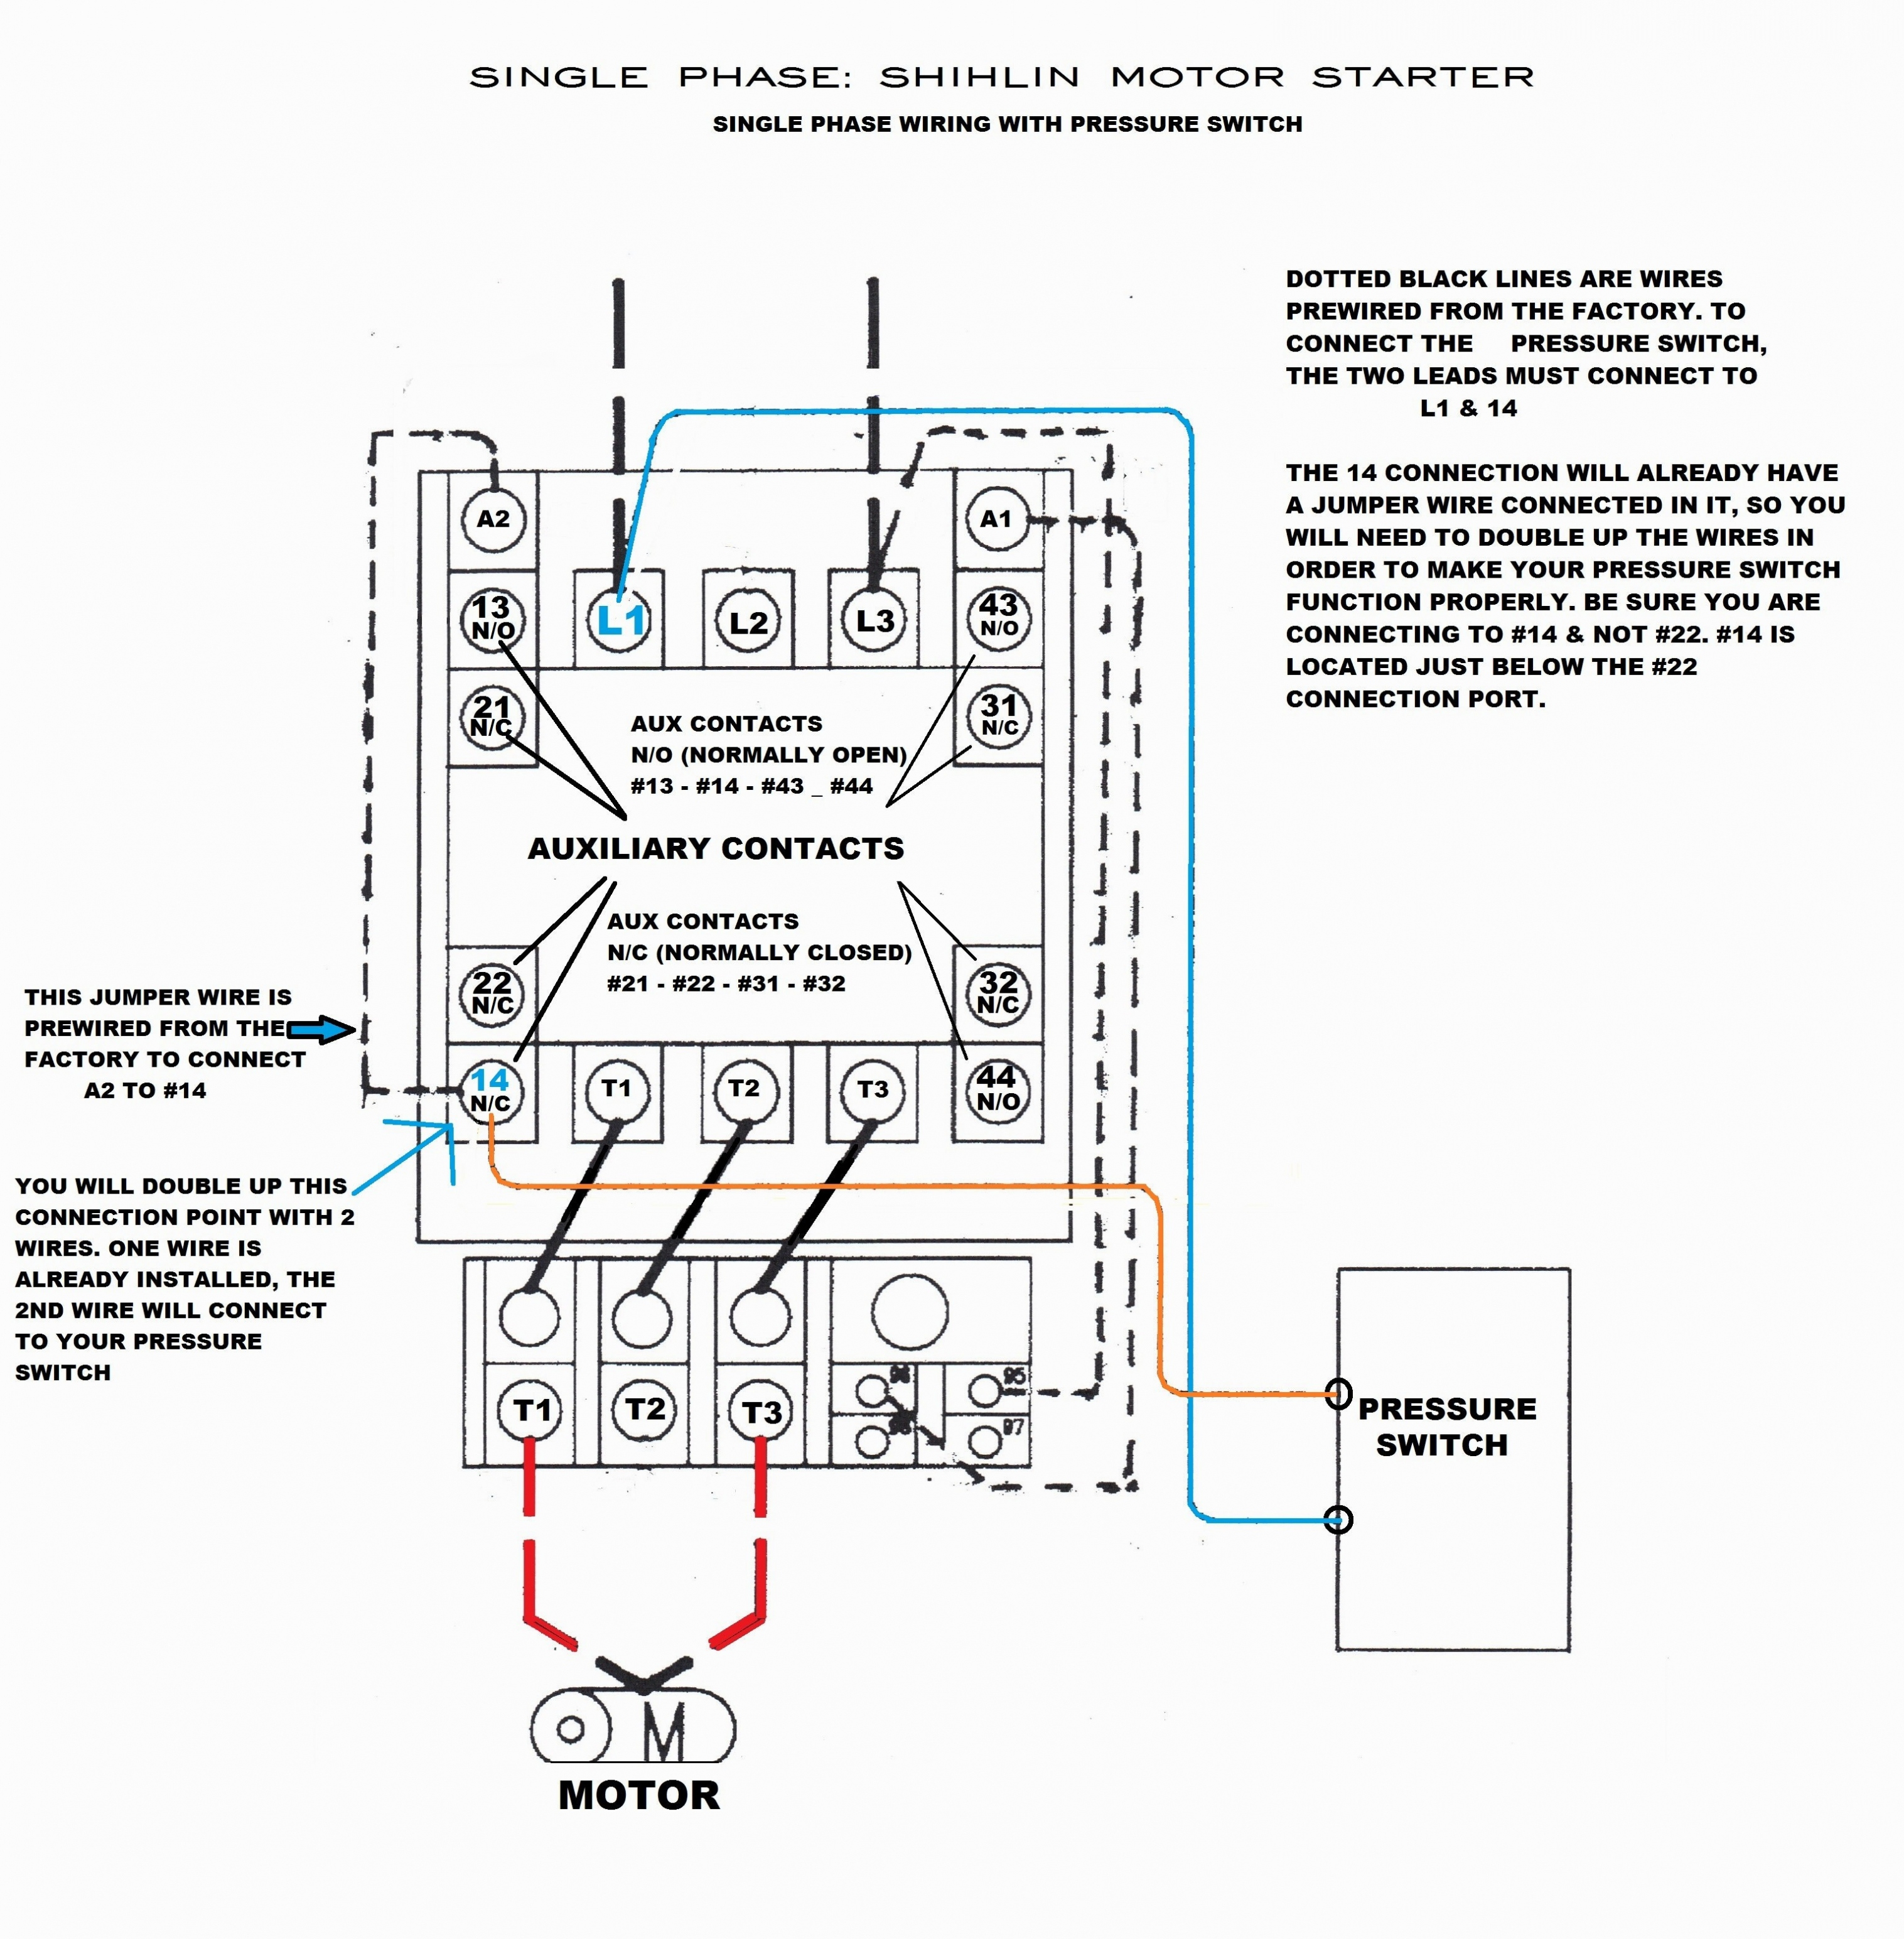 Starter Wiring Diagrams | Wiring Library - Square D Motor Starter Wiring Diagram